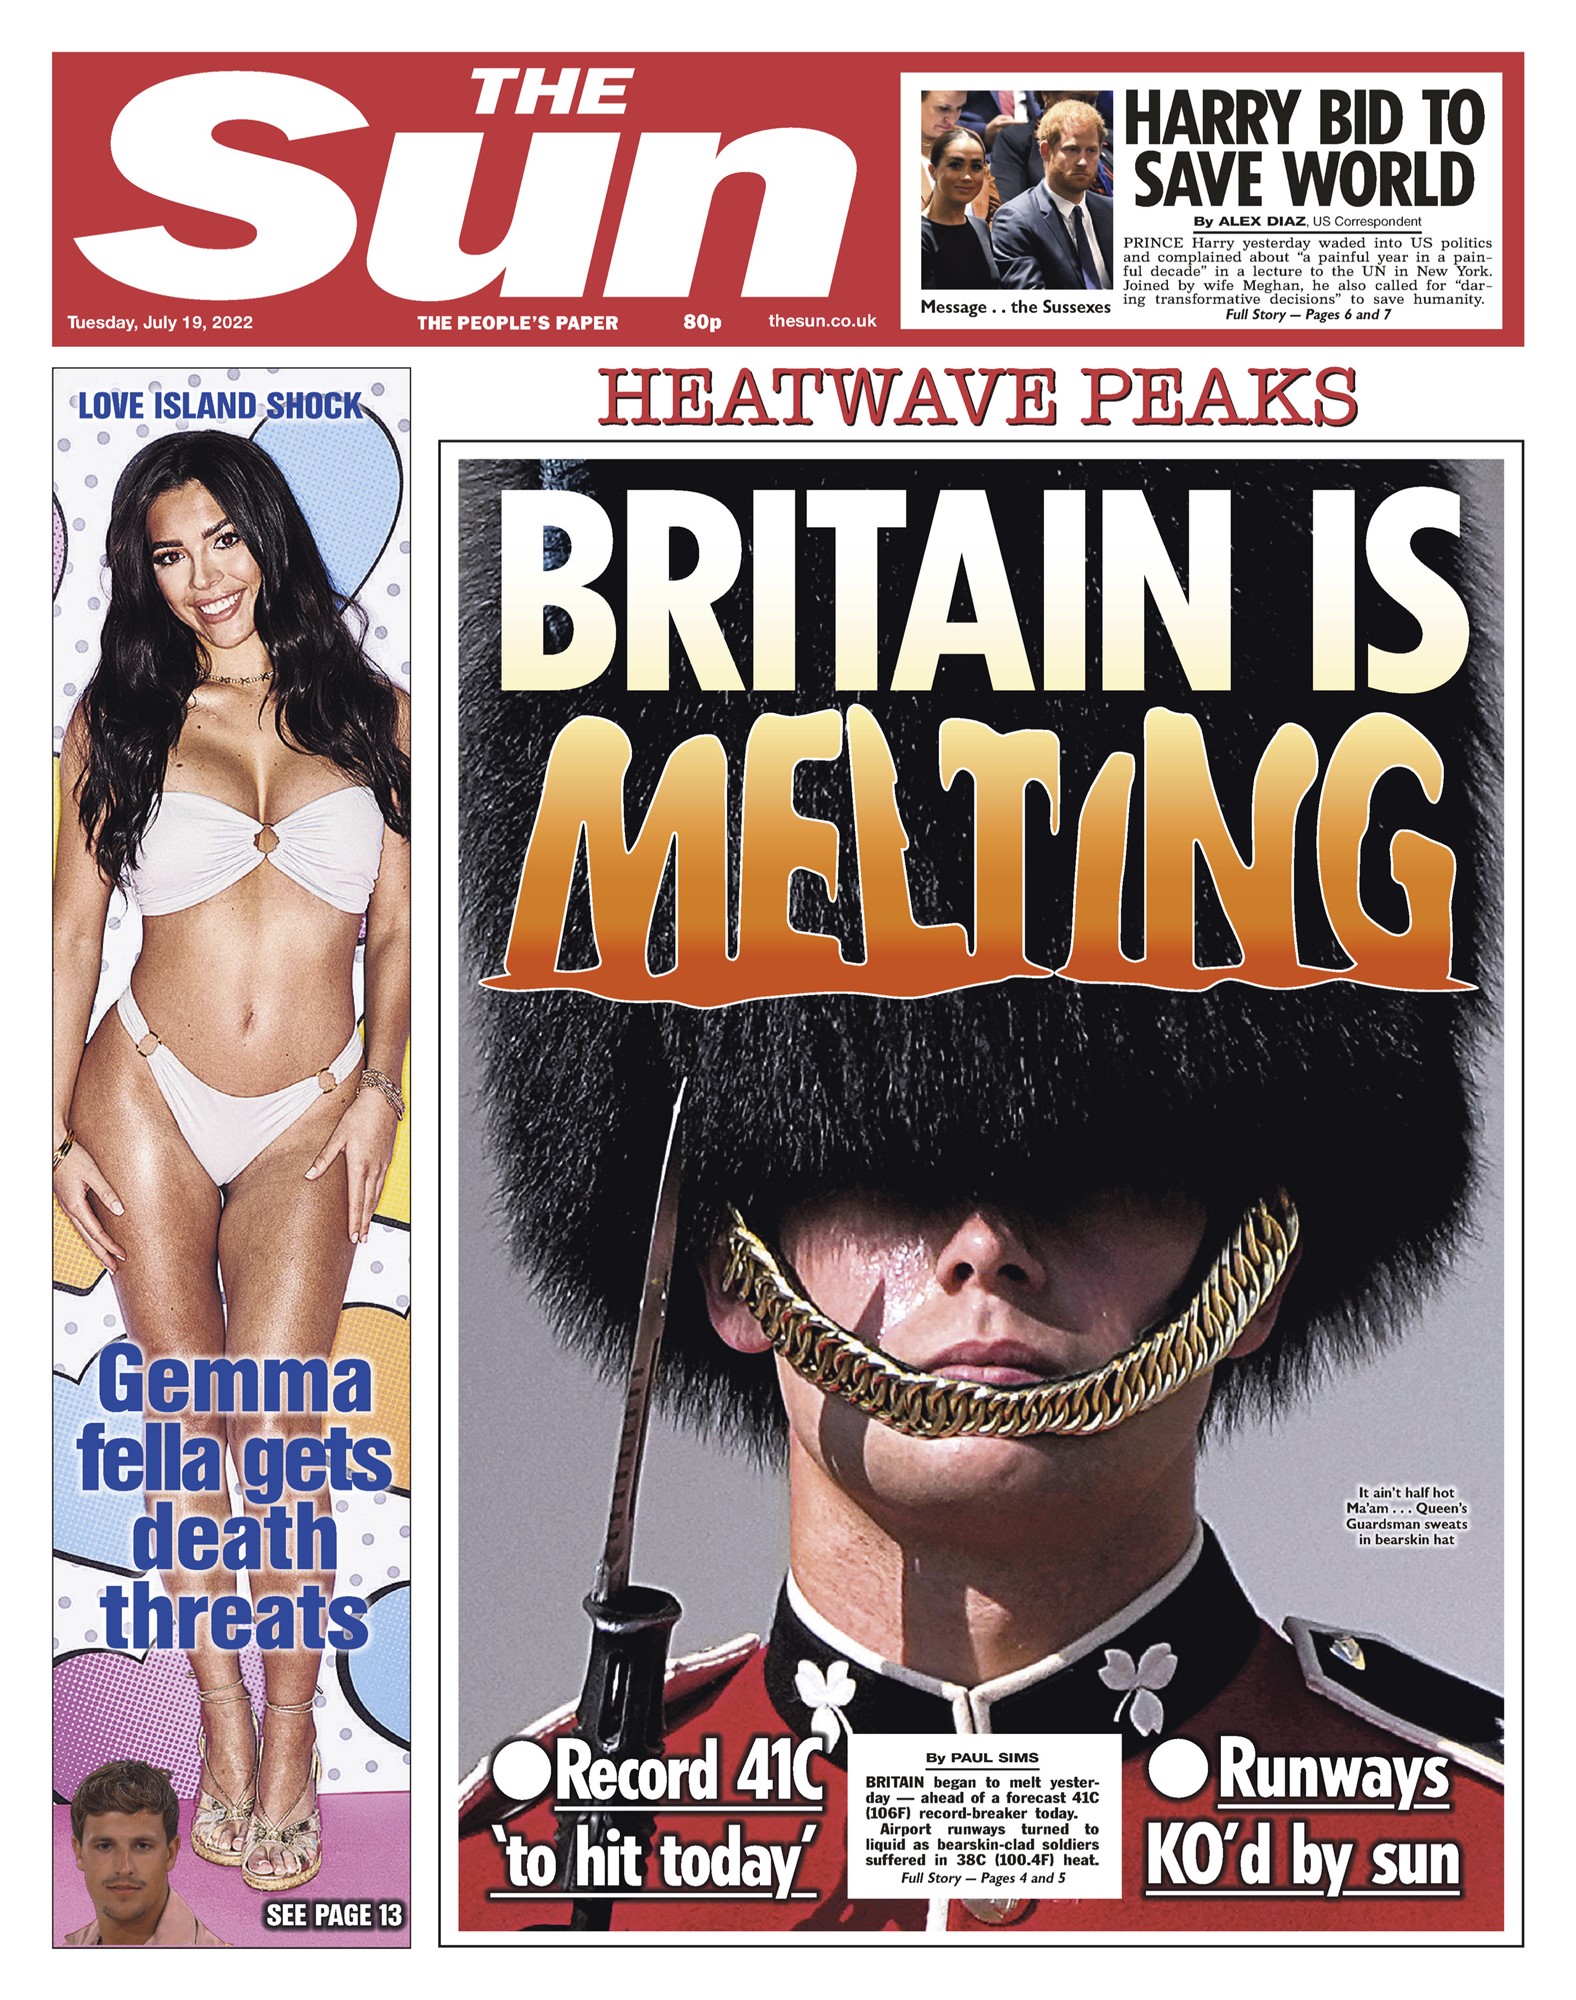 A newspaper front page says Britain is melting.